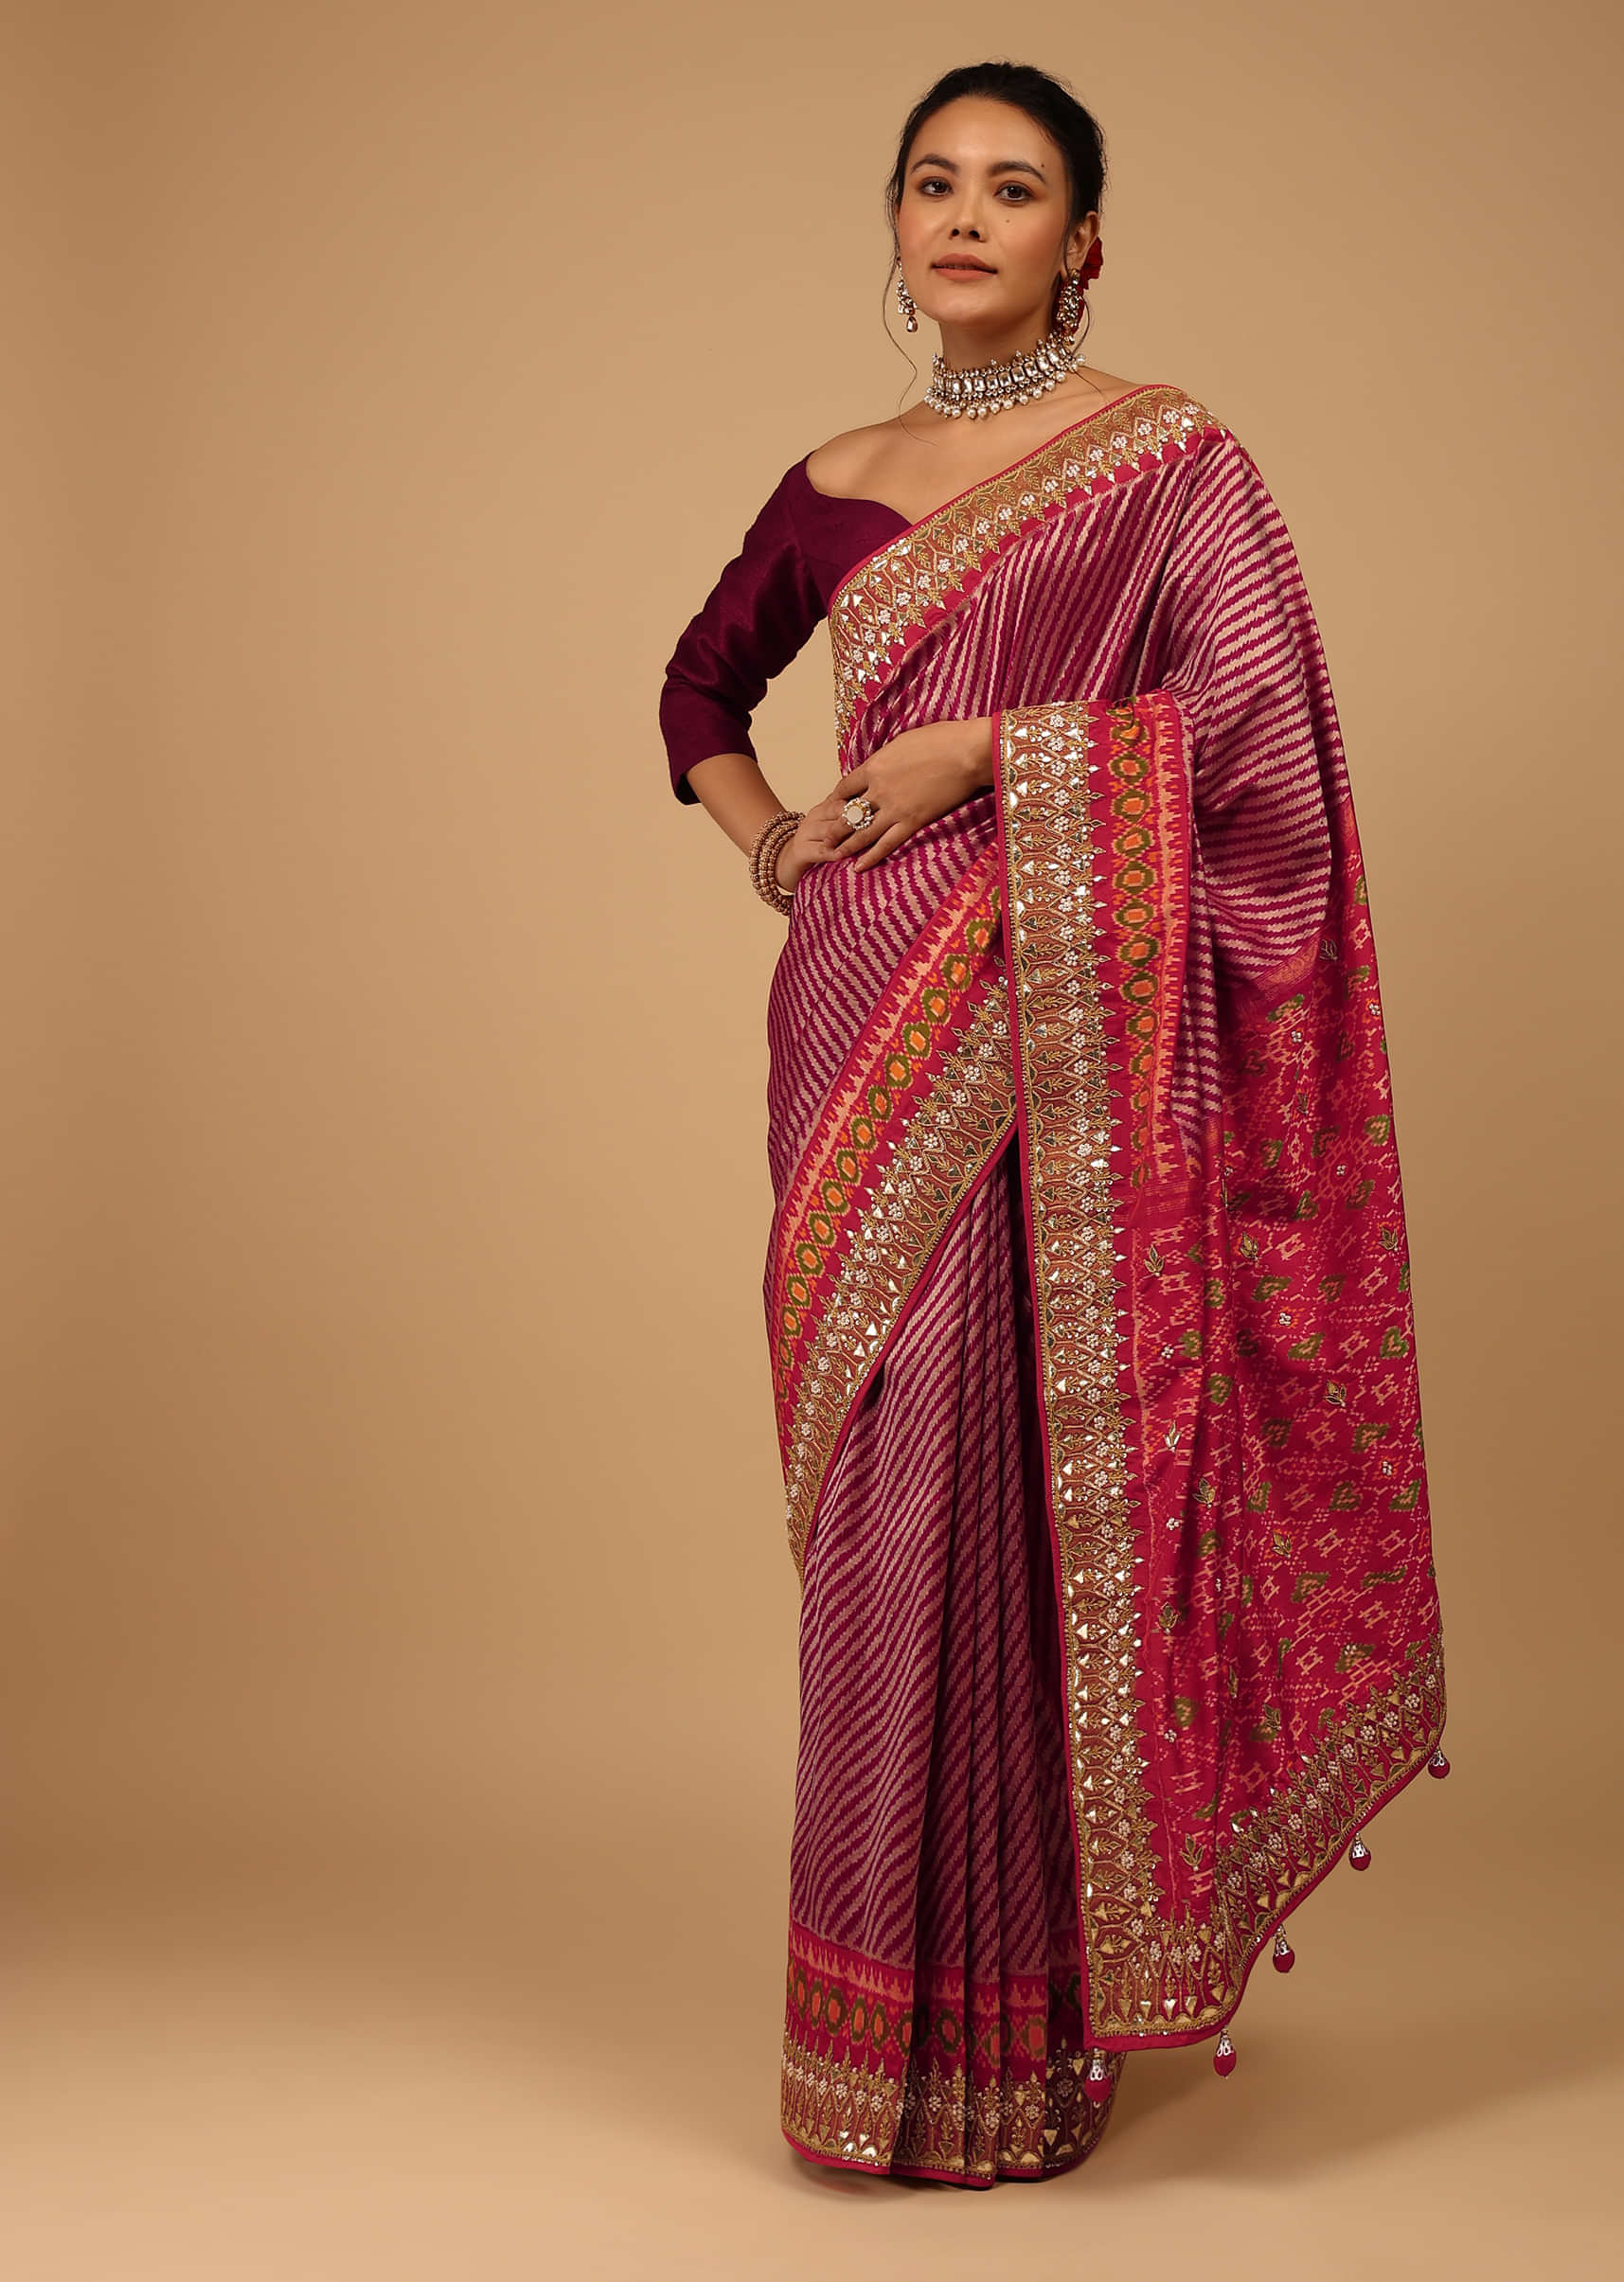 Hot Pink Saree In Pure Silk With Handloom Patola Ikat Weave